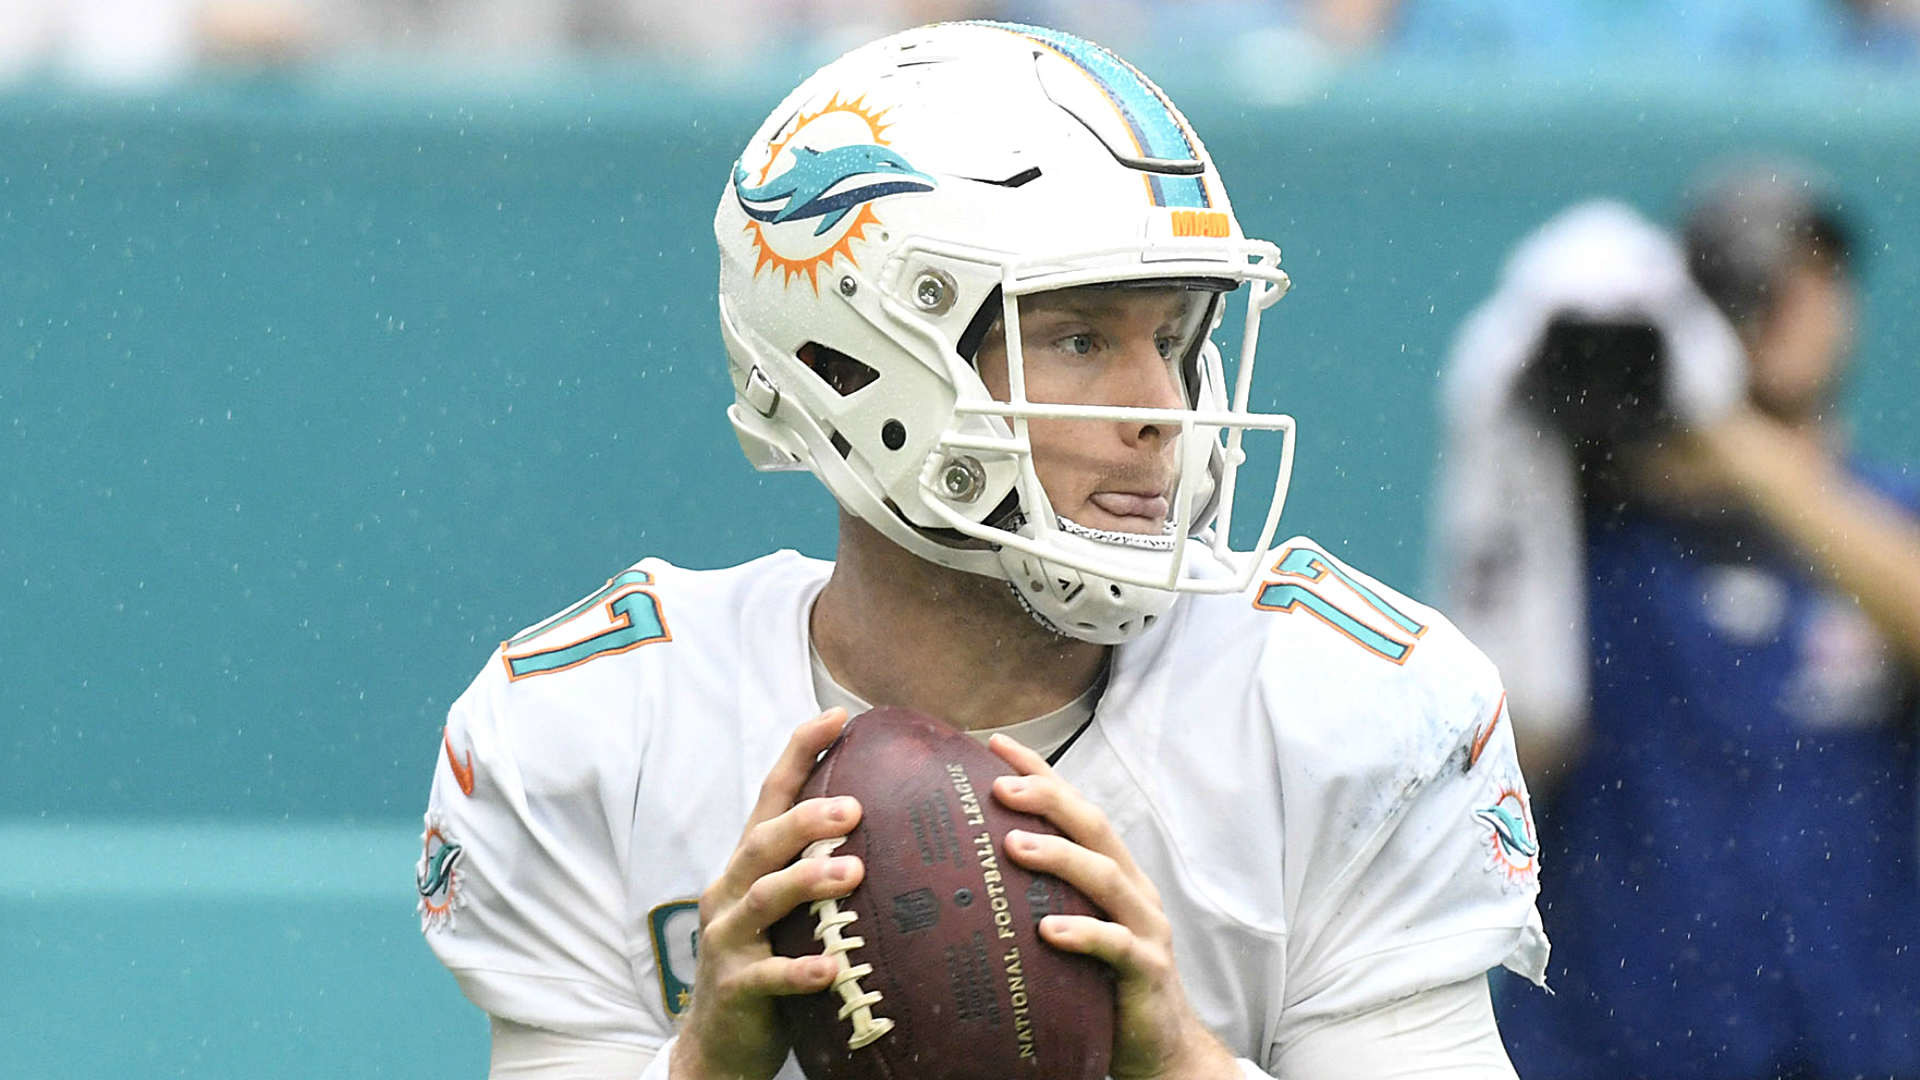 1920x1080 Following inconclusive MRI on Ryan Tannehill's left knee, Dolphins mulling  options | NFL | Sporting News